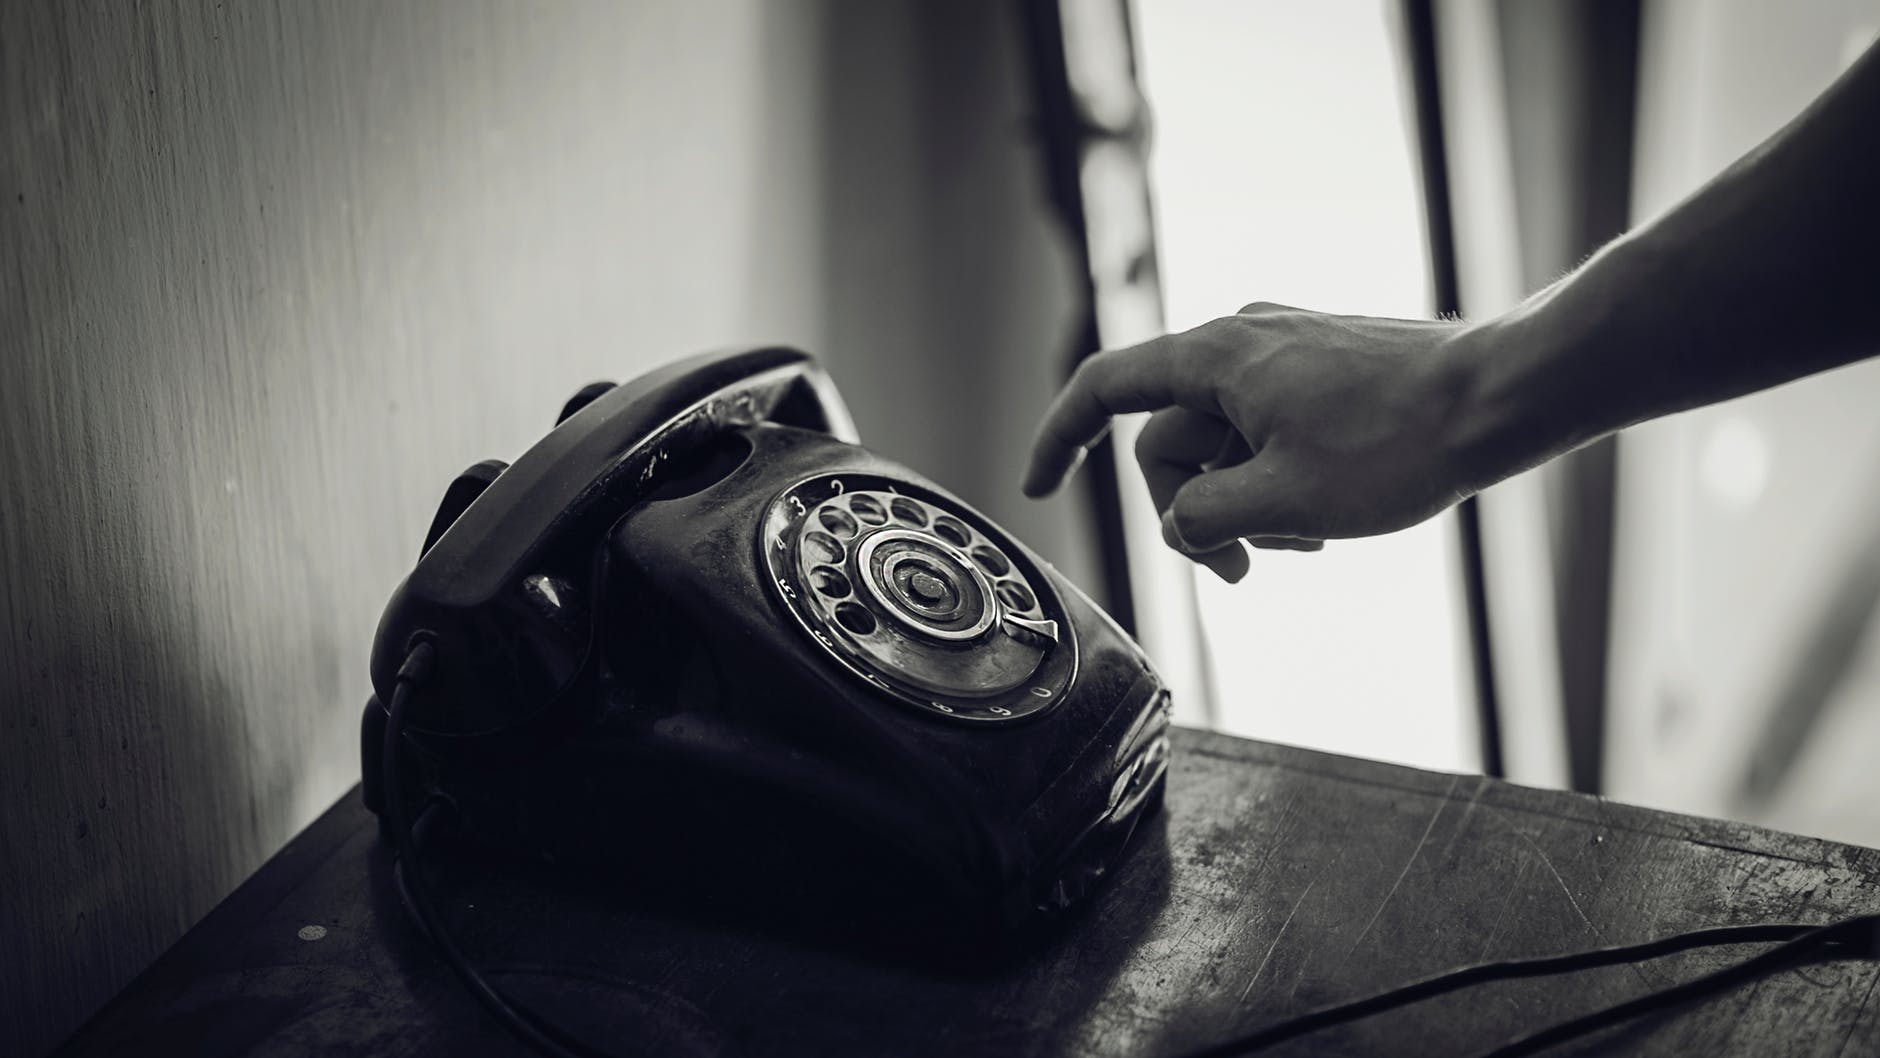 Grayscale photo of rotary telephone beside person hand